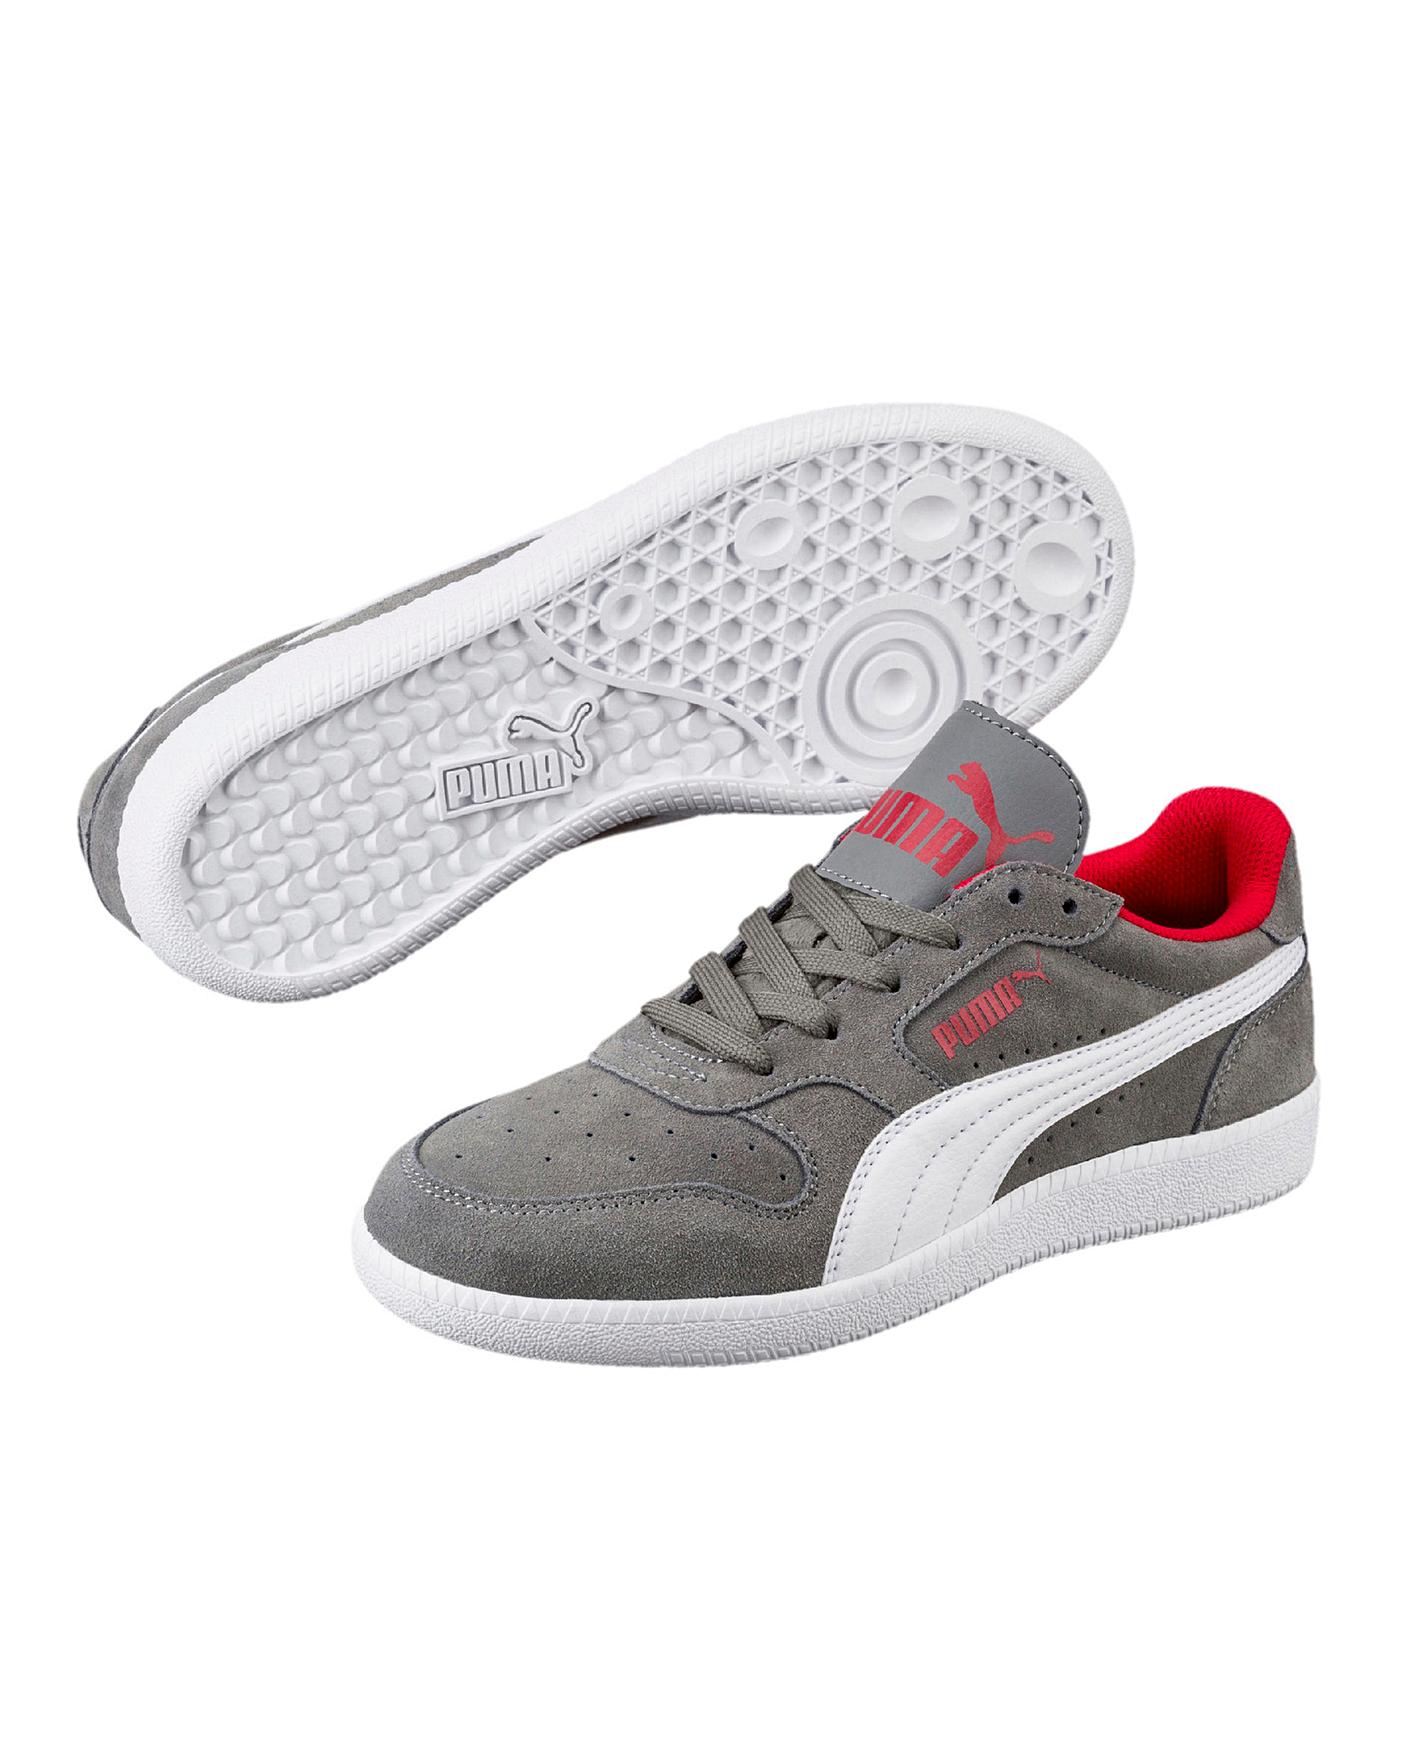 Puma Icra Suede Trainers | Simply Be